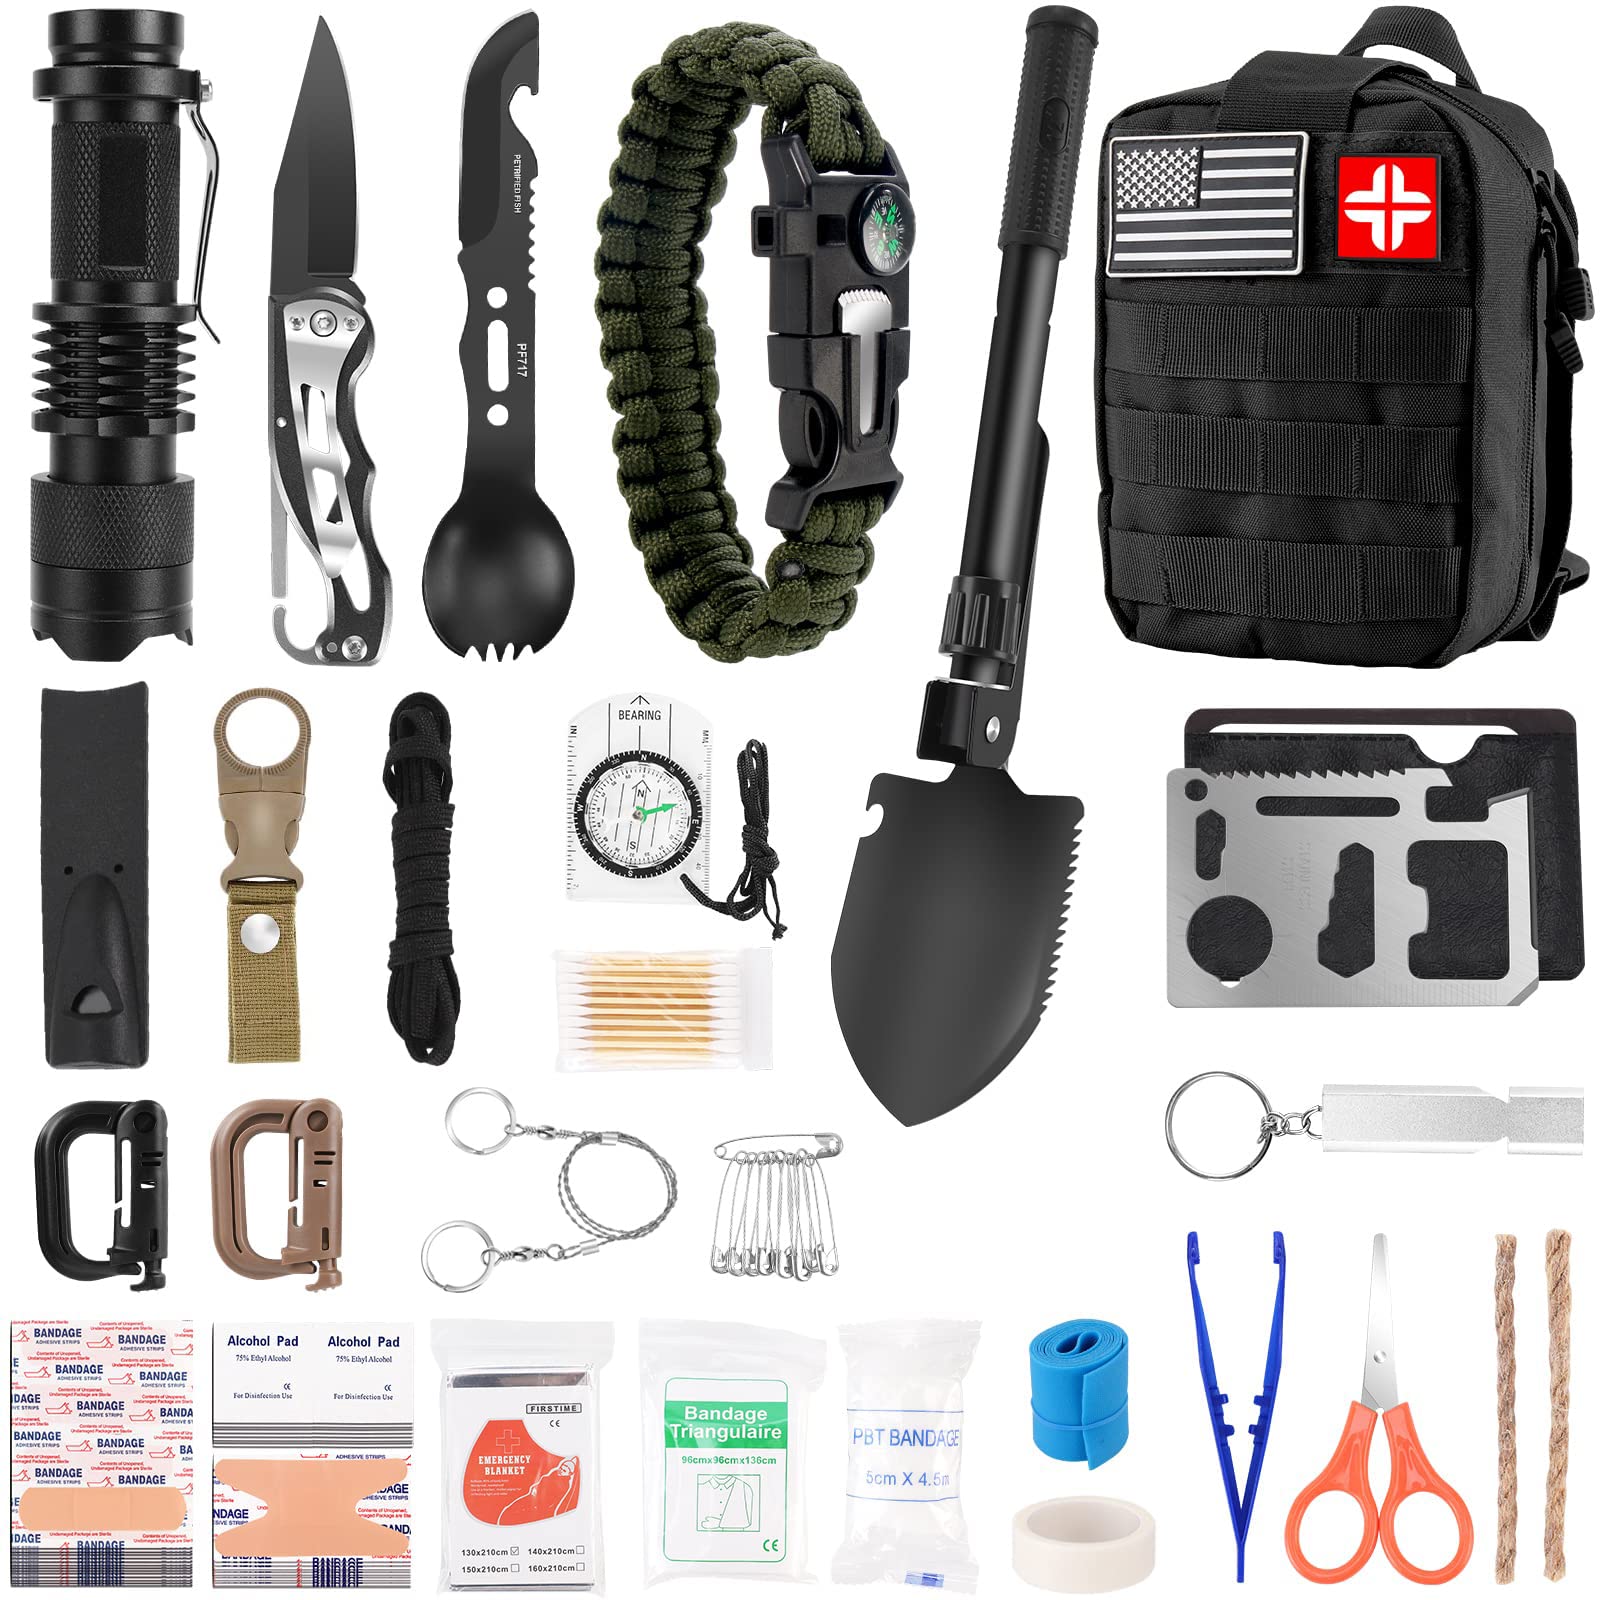 Survival Kit by MONTERRA, 50 Pcs, Survival Gear and Equipment, Camping –  USA Camp Gear